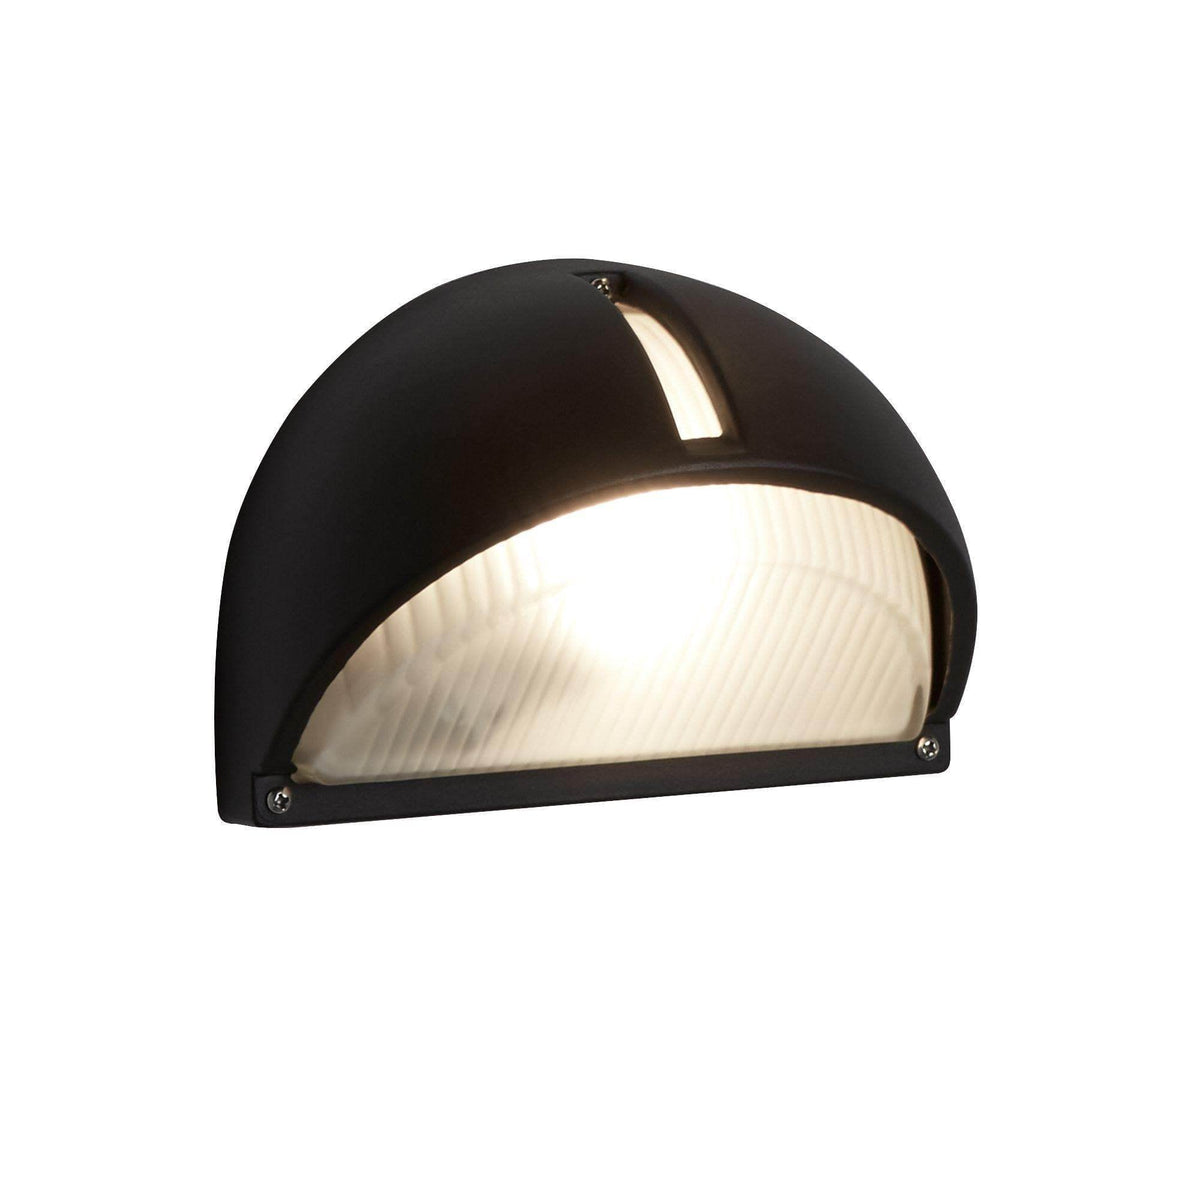 SEARCHLIGHT 130
BLACK DIE CAST ALUMINIUM IP44 HALF MOON OUTDOOR LIGHT WITH RIDGED FROSTED GLASS